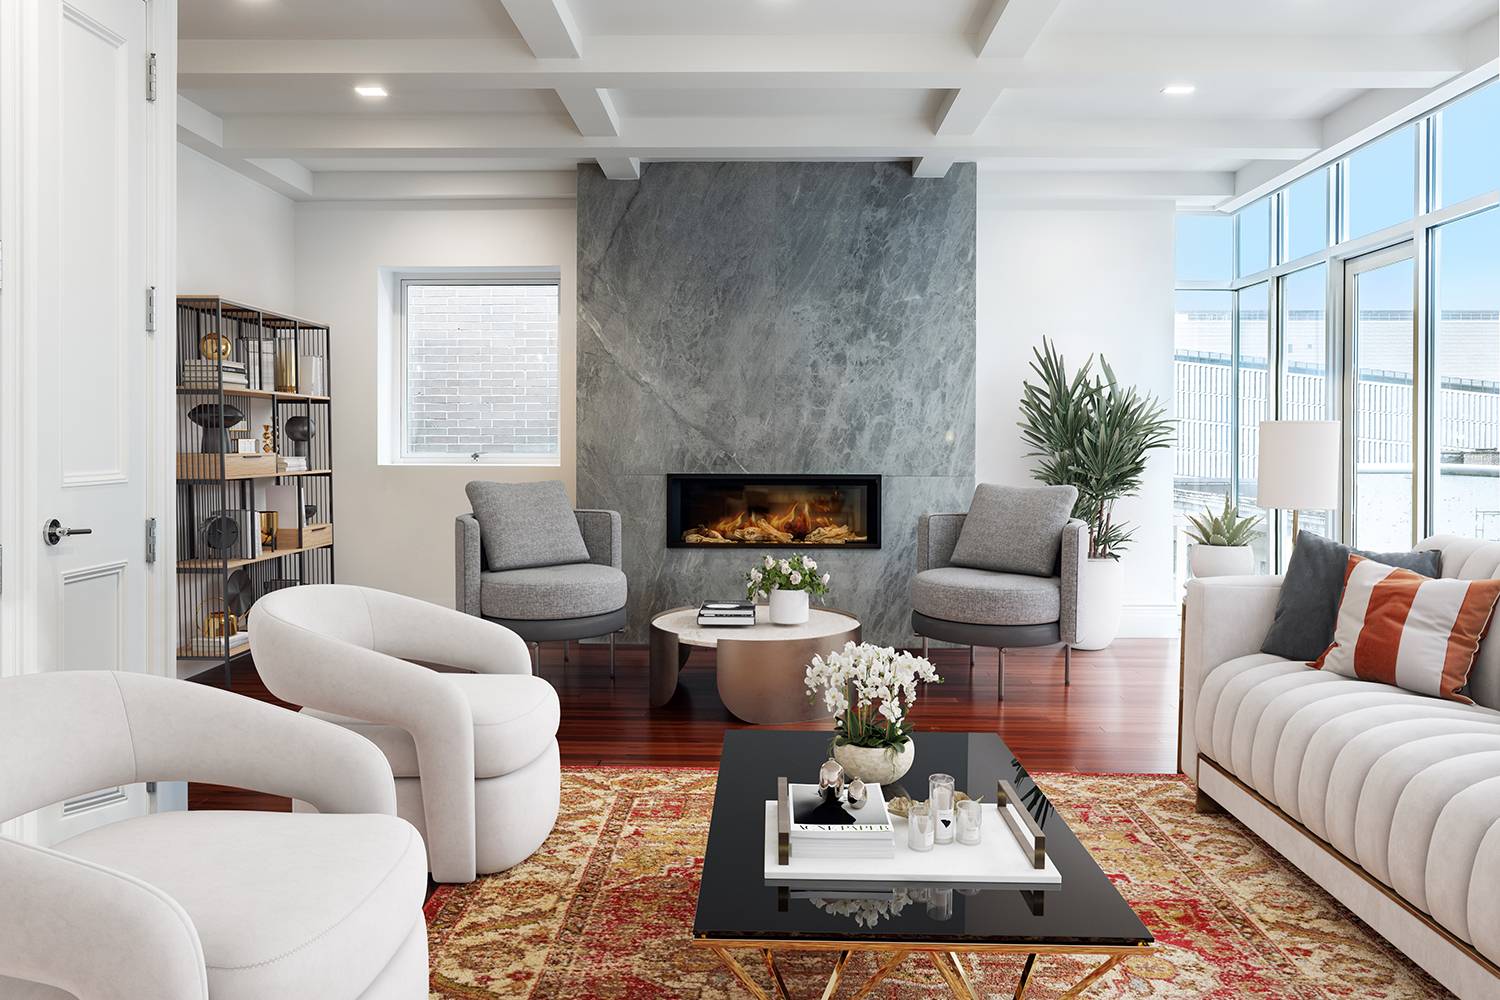 A sublime triplex penthouse nestled in the heart of Hudson Square, this incredible 4 bedroom, 3.